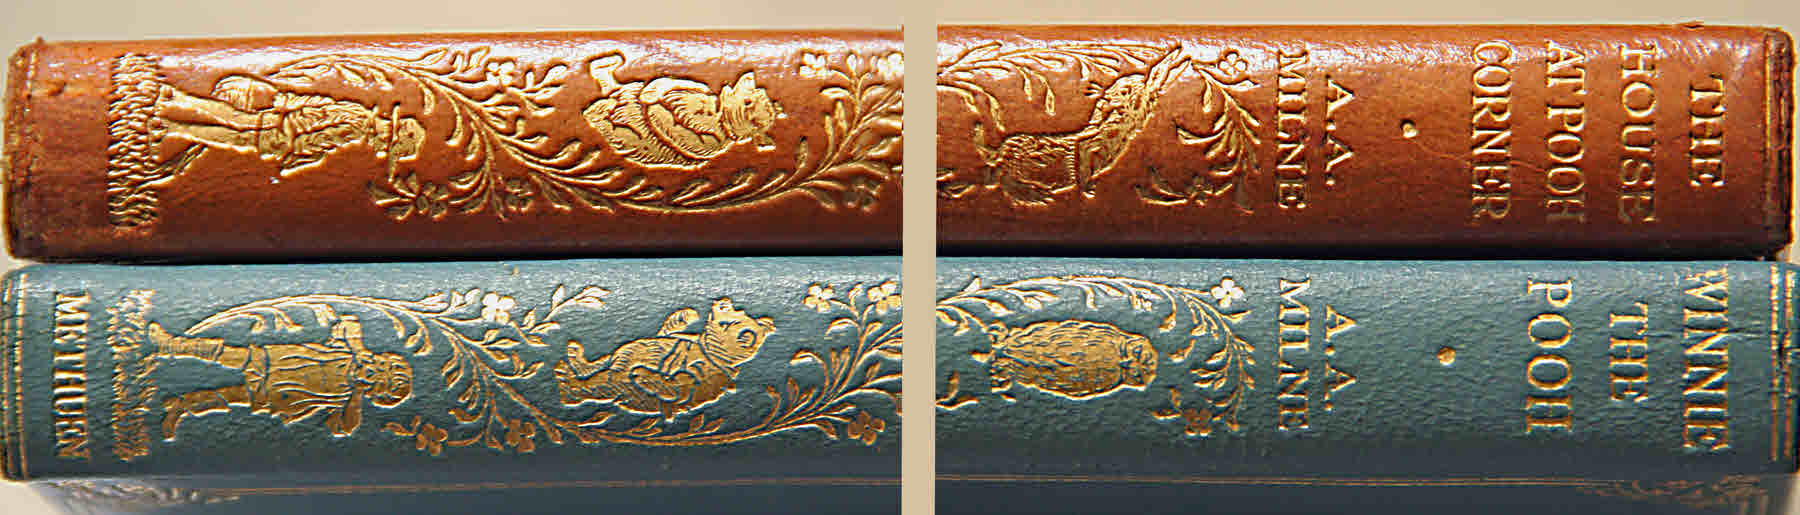 ((img to show detail in spines of several special bindings))